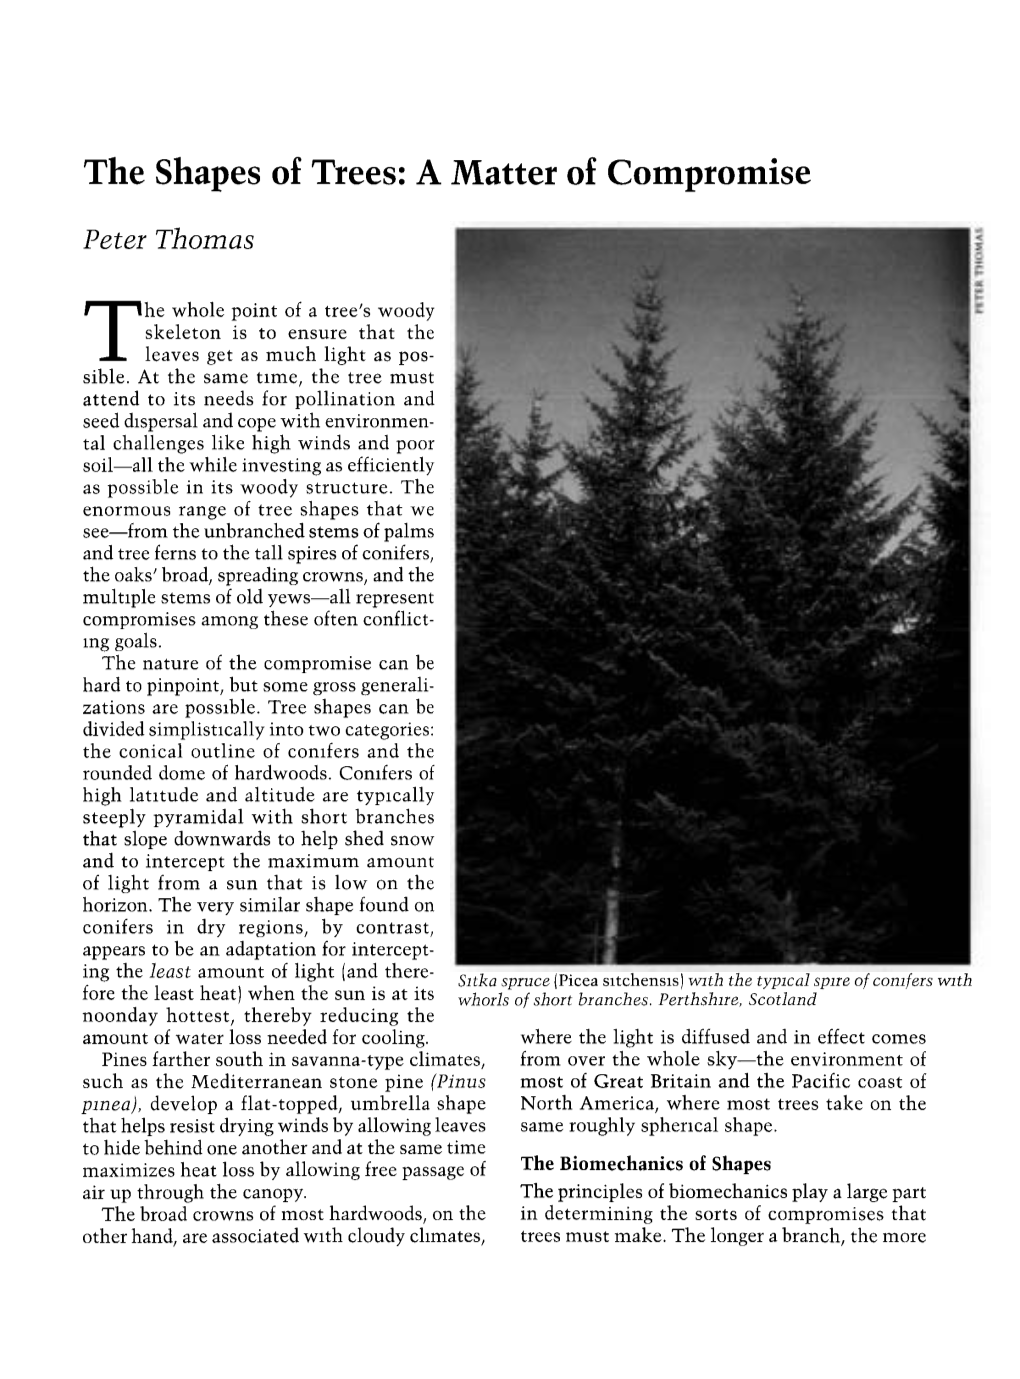 The Shapes of Trees: a Matter of Compromise